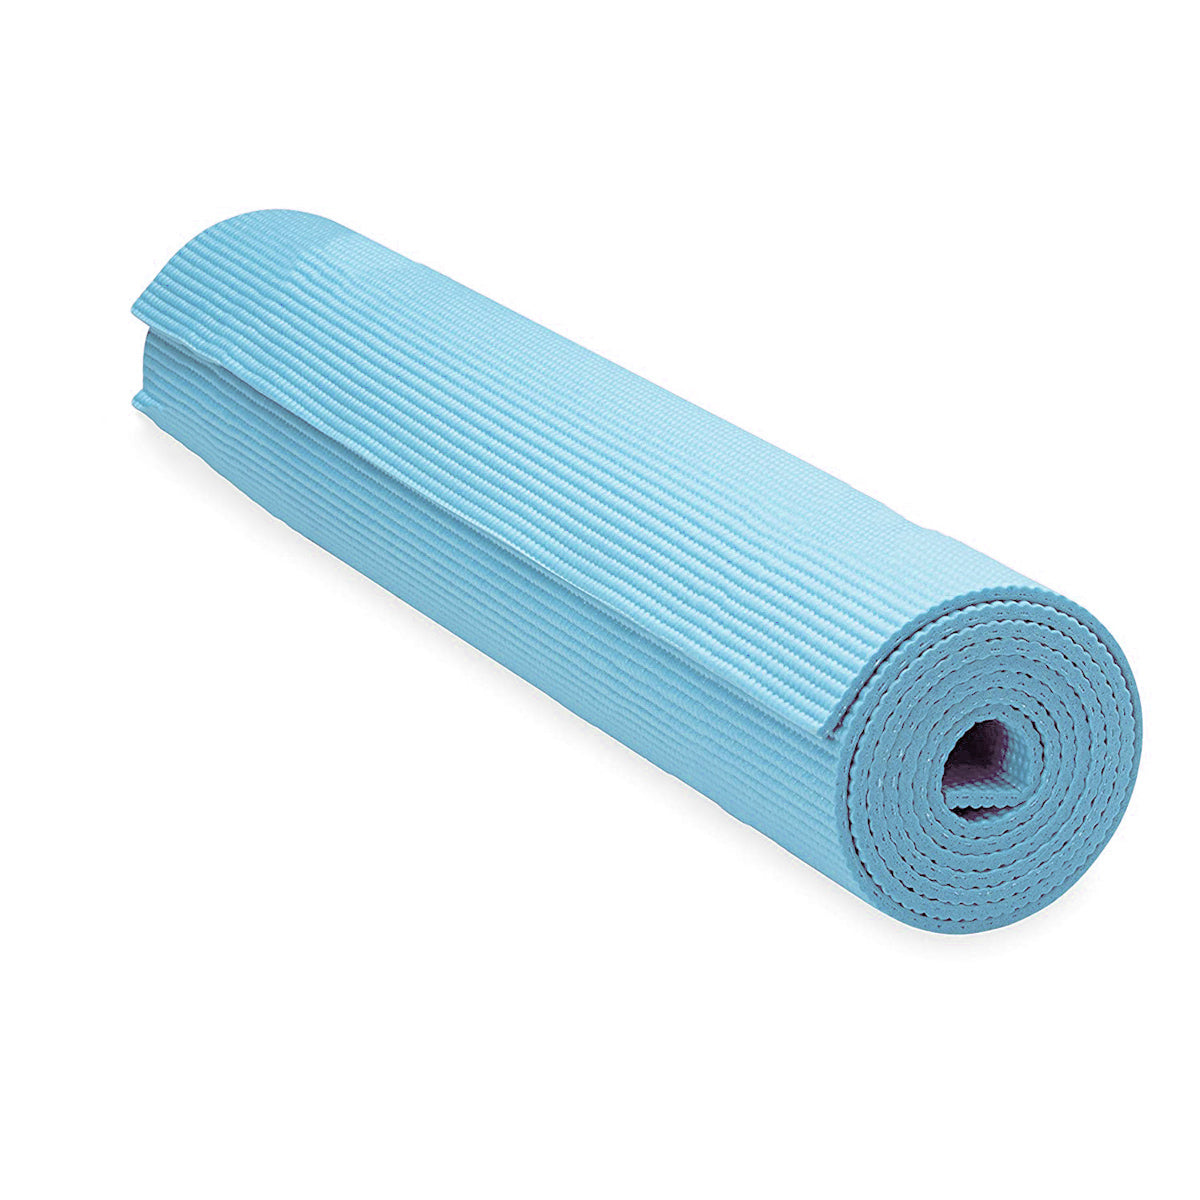 Kookee PVC Fitness Yoga Mat 3mm Thick for Workout, Gym, Yoga, Pilates Non-Slip and Eco-Friendly Mat (1734)